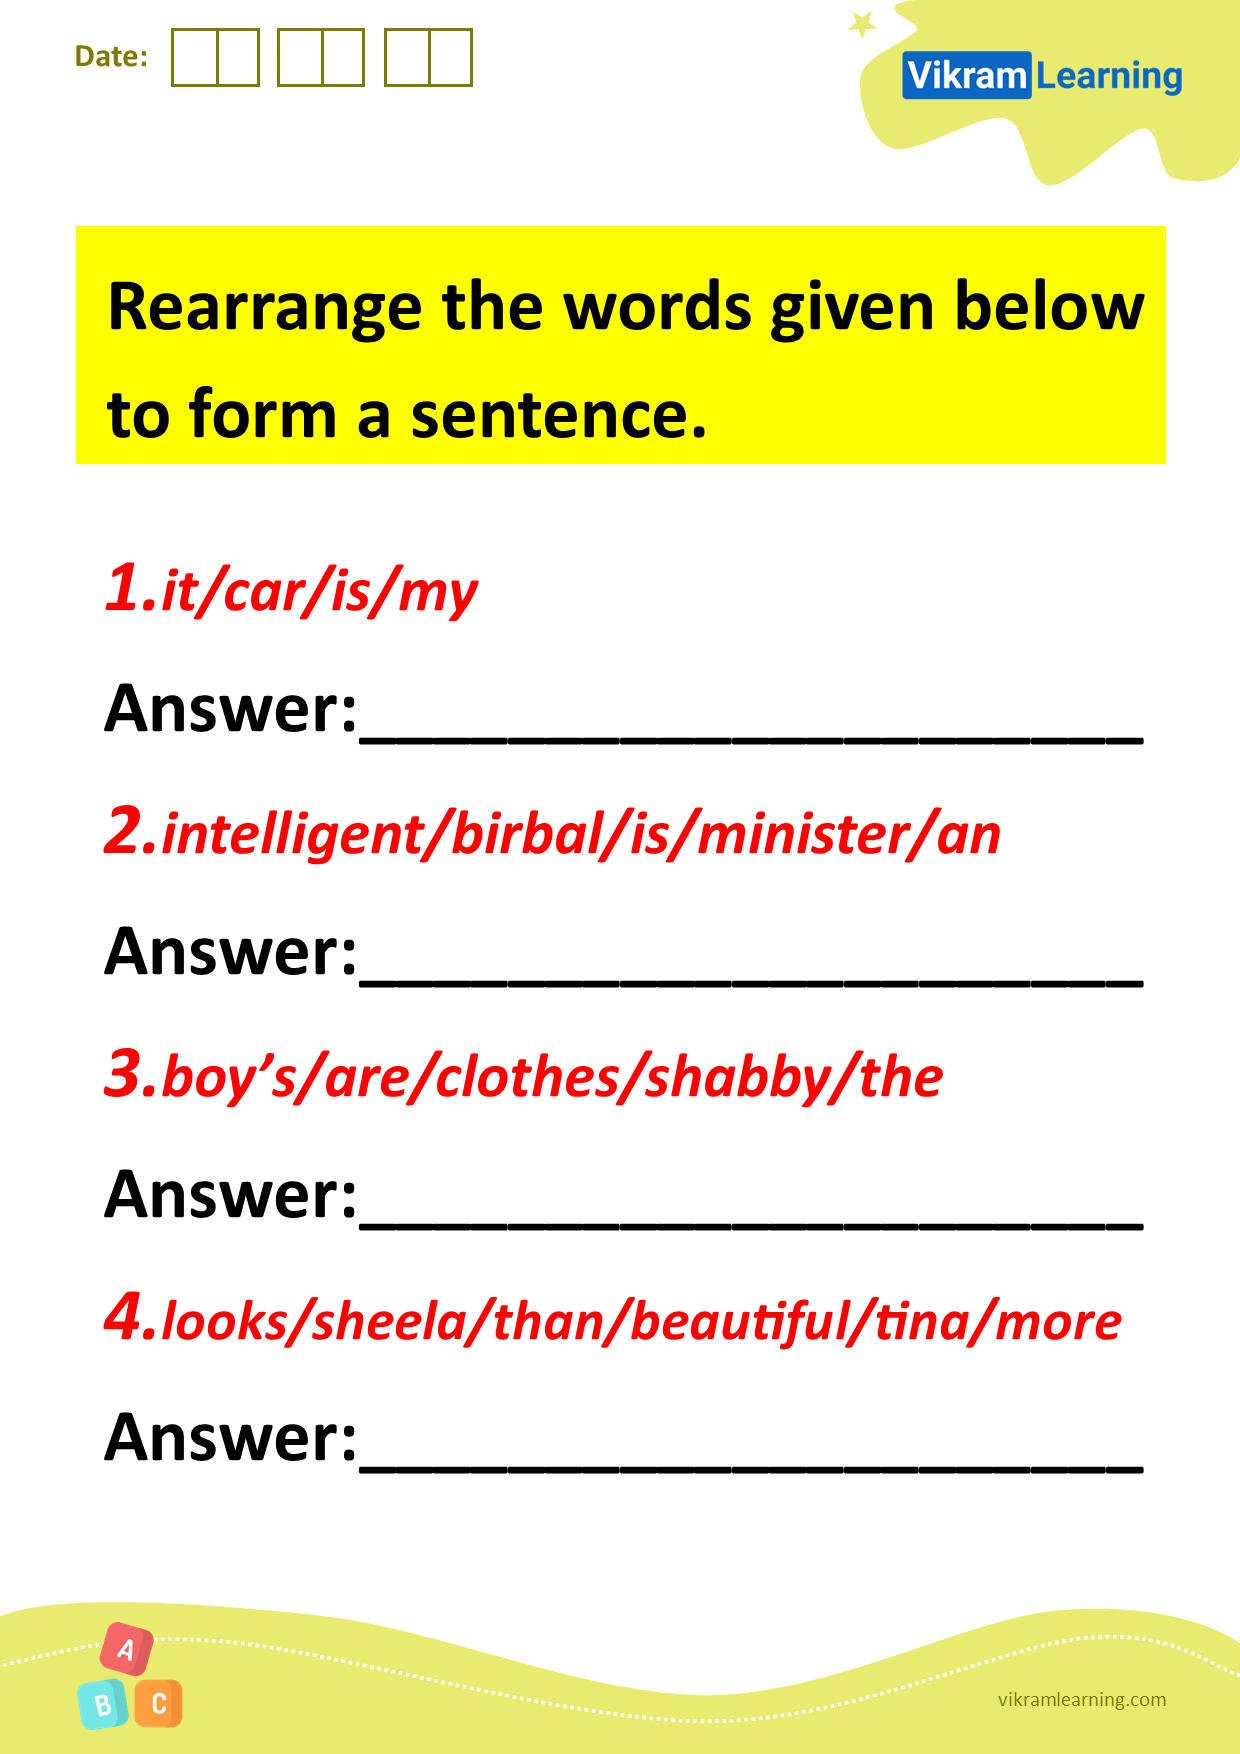 download-rearrange-the-words-given-below-to-form-a-sentence-worksheets